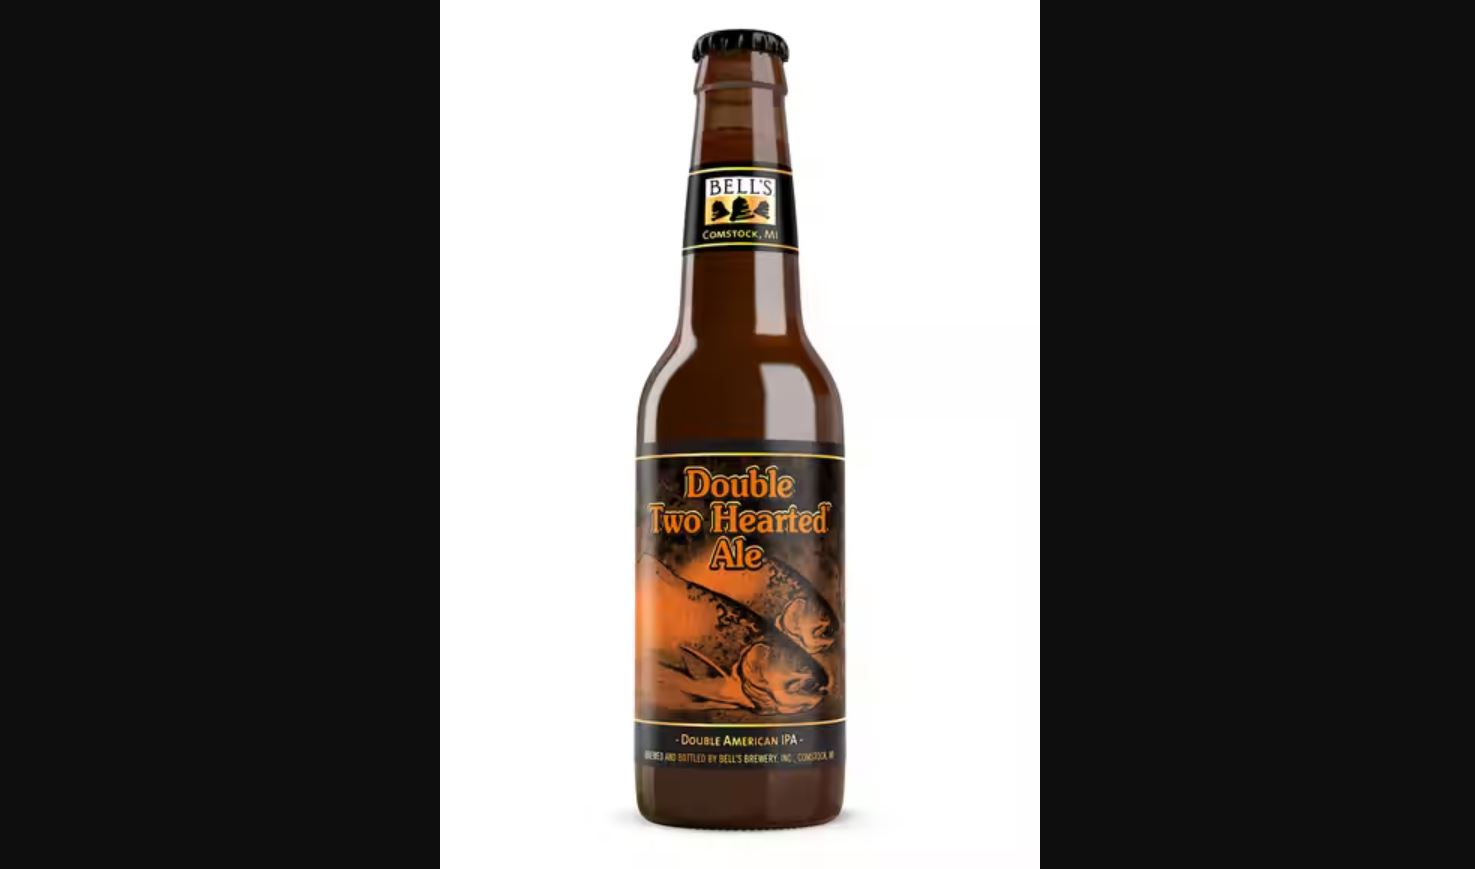 Bell’s Double Two Hearted Ale